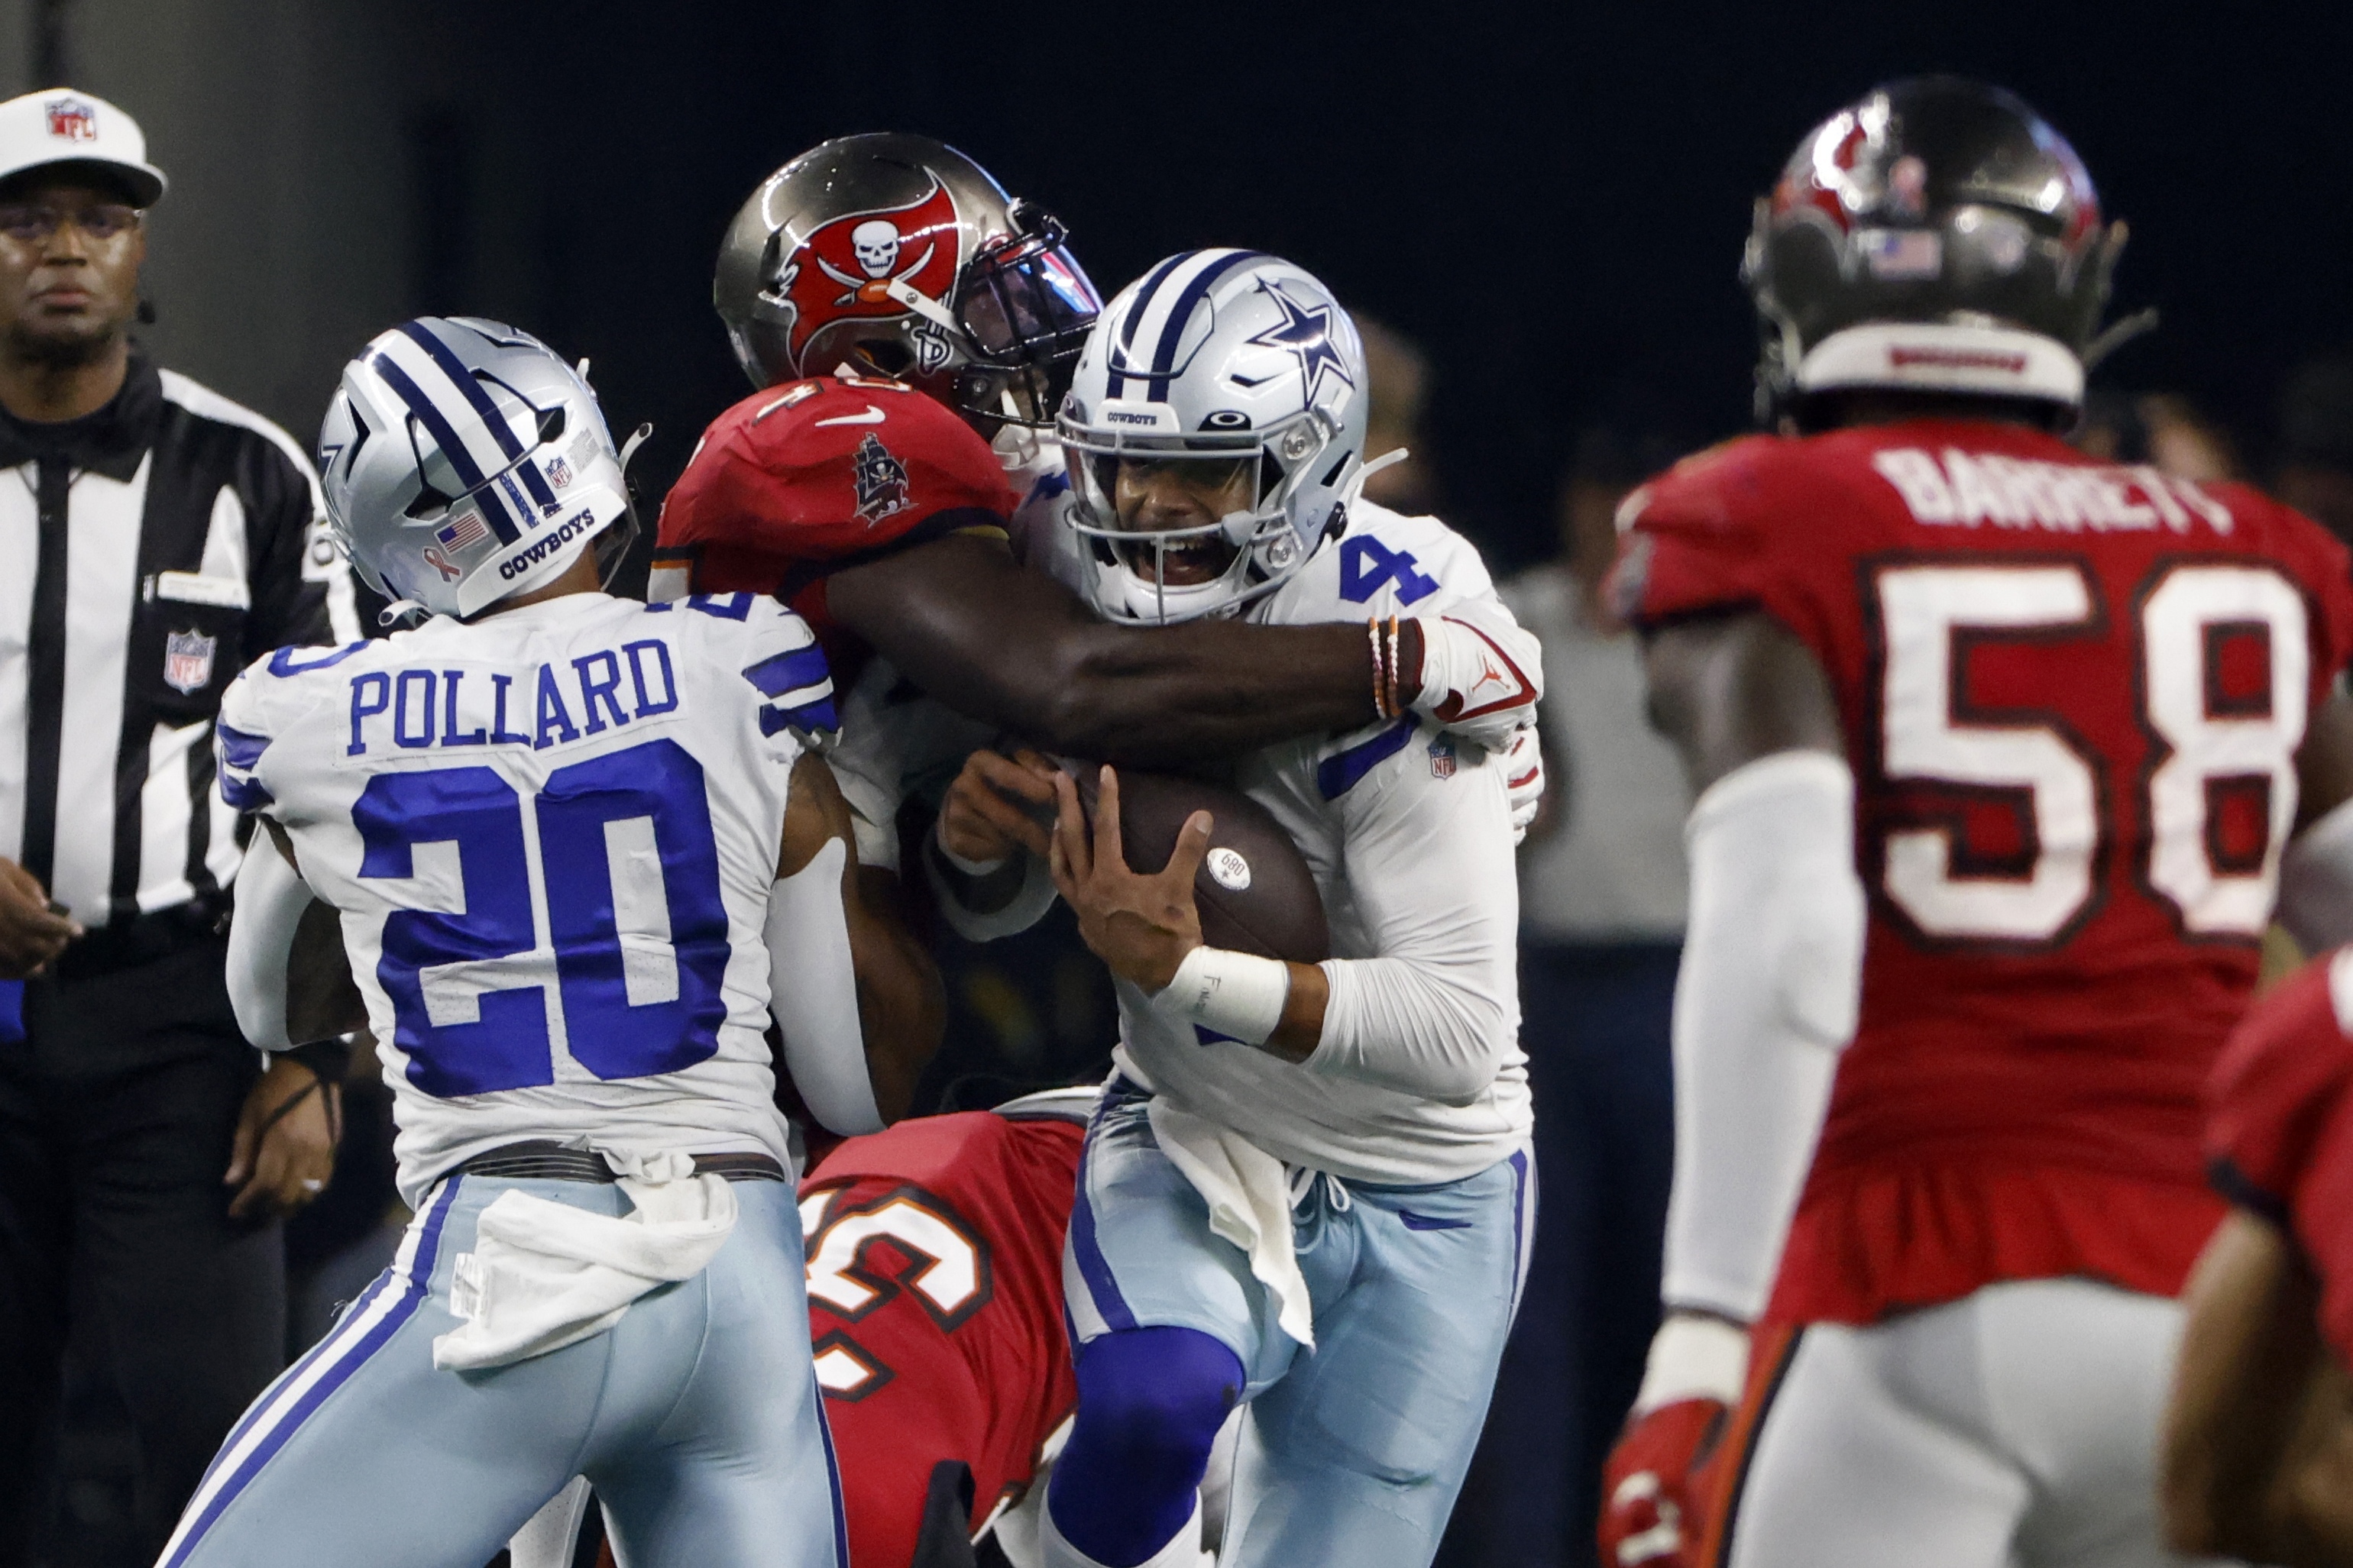 Brady-led Bucs primed to host Cowboys in NFC wild-card game